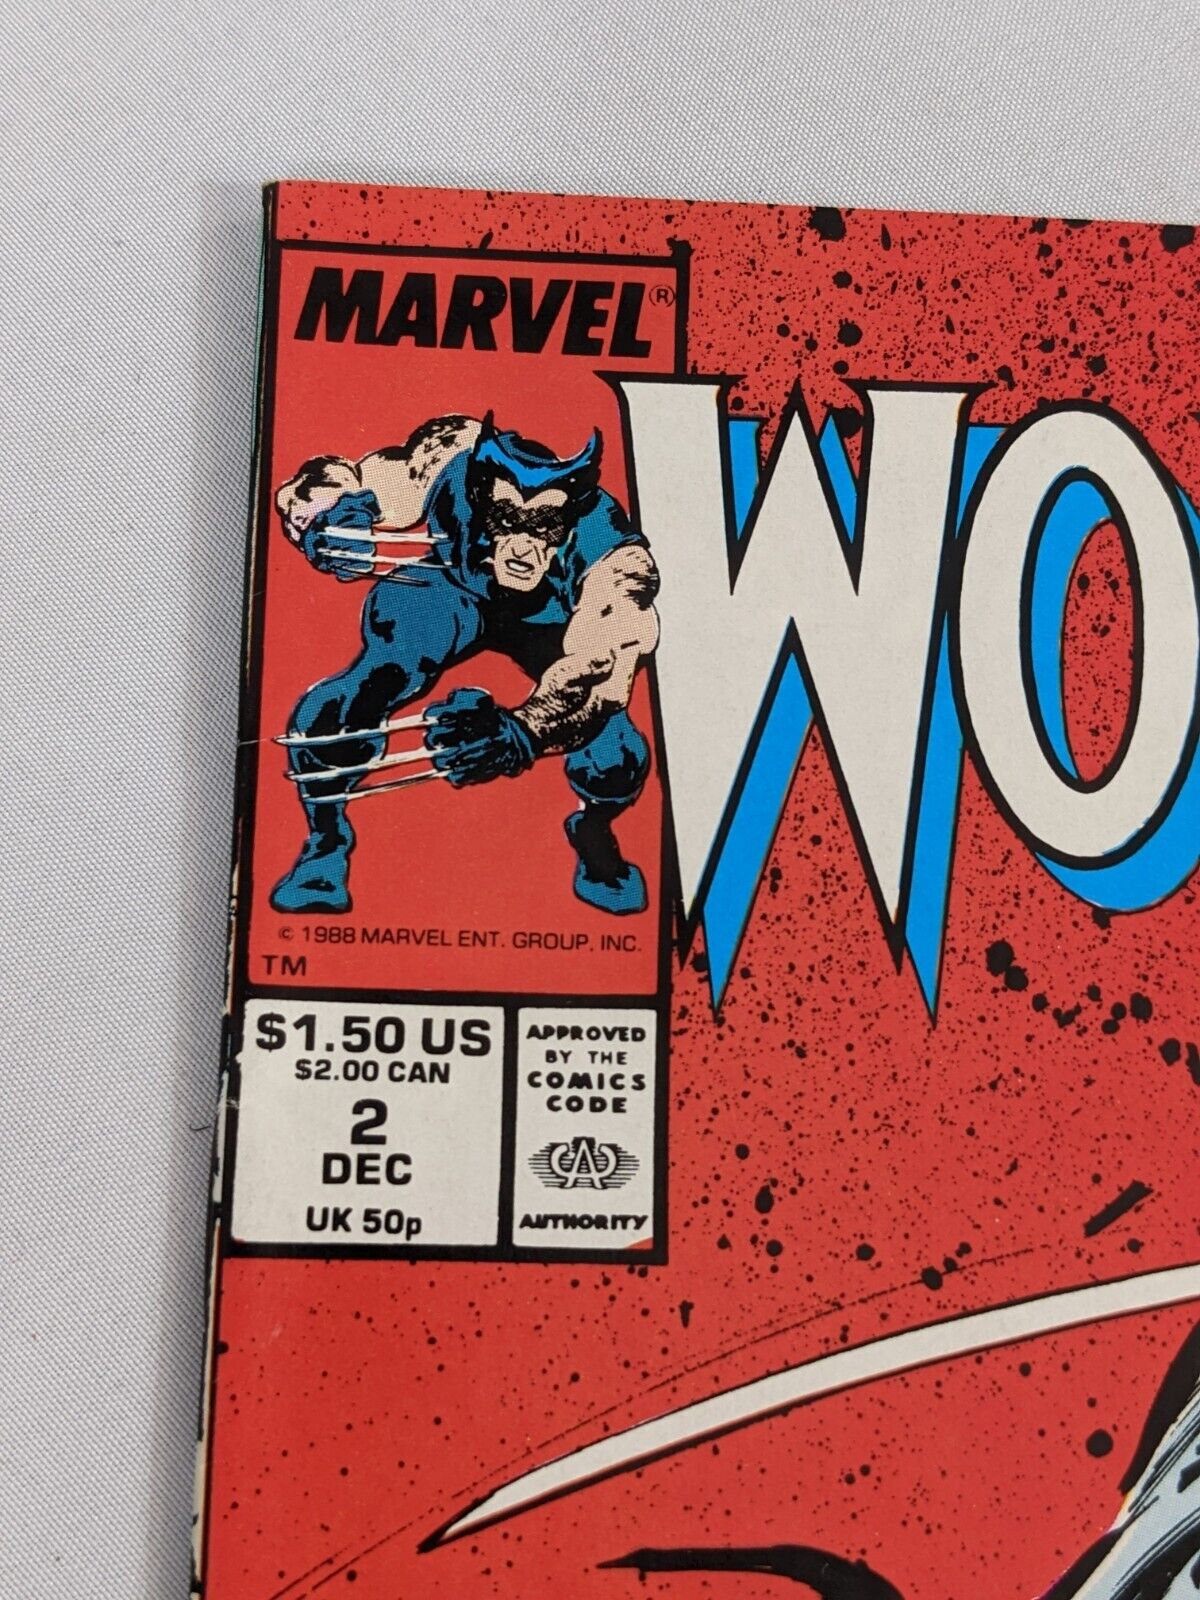 Marvel Wolverine Issue #2 December 1988 Collectible Comic Book